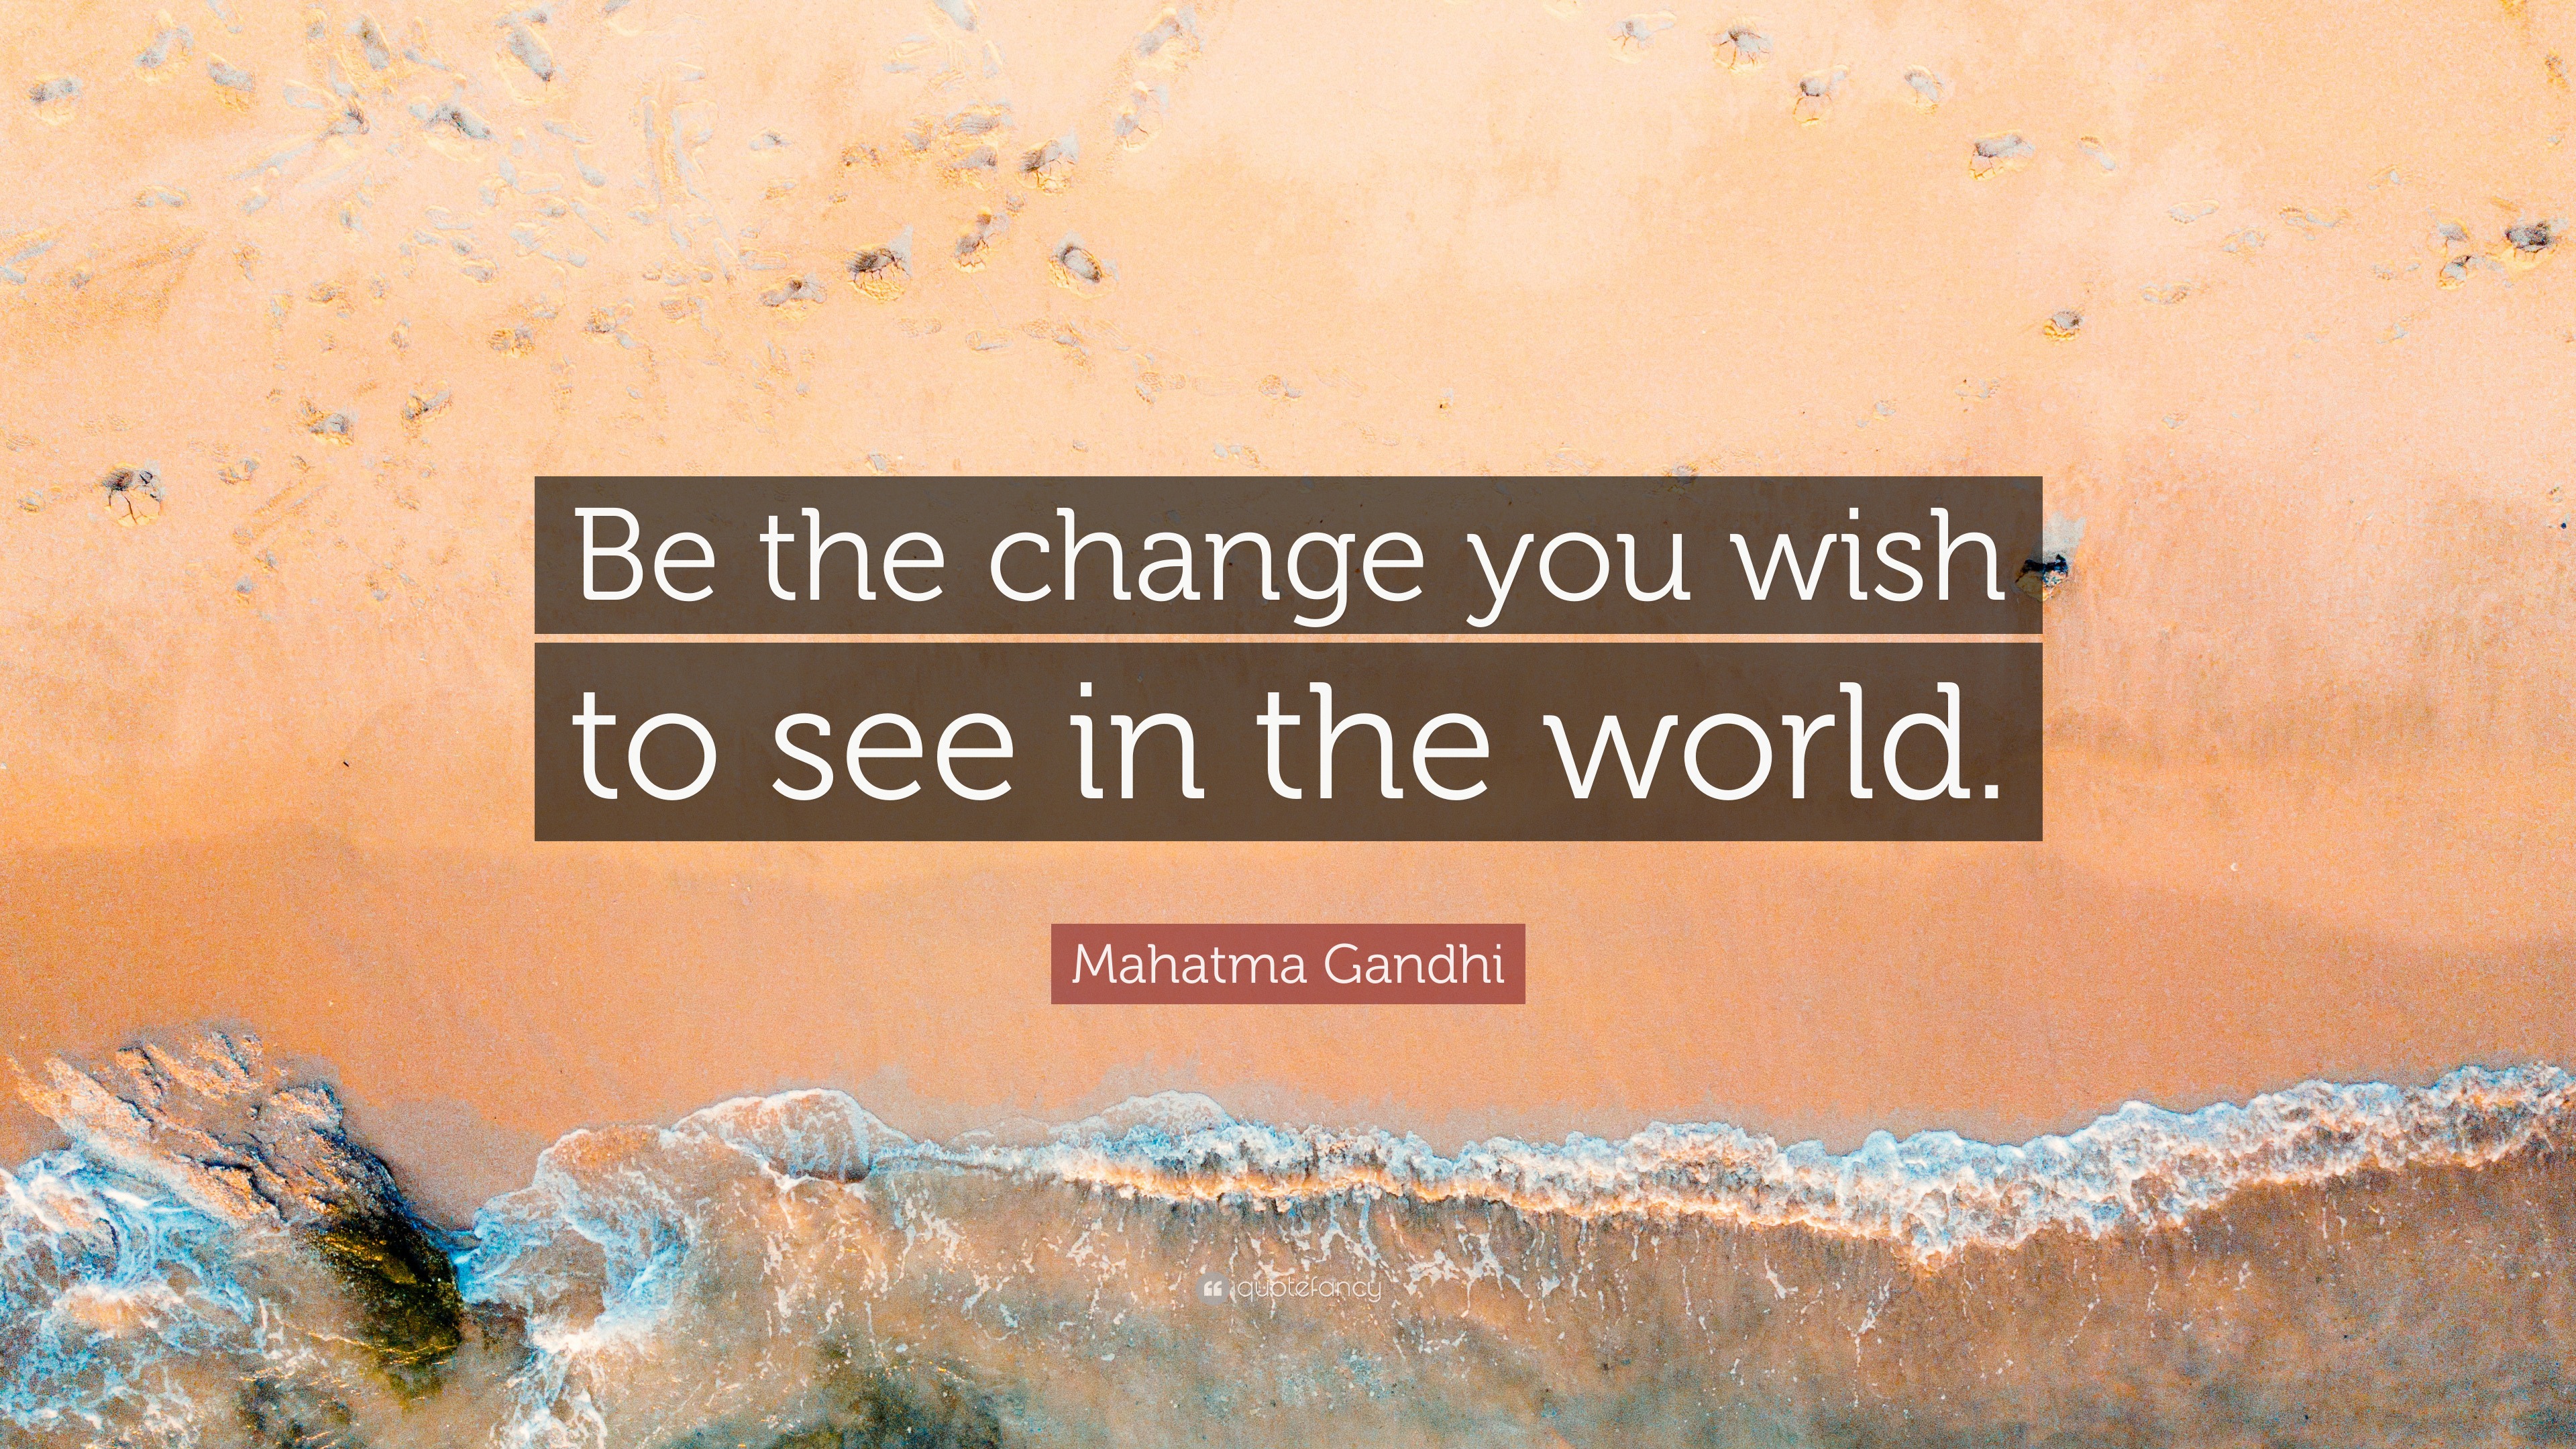 Mahatma Gandhi Quote: "Be the change that you wish to see ...